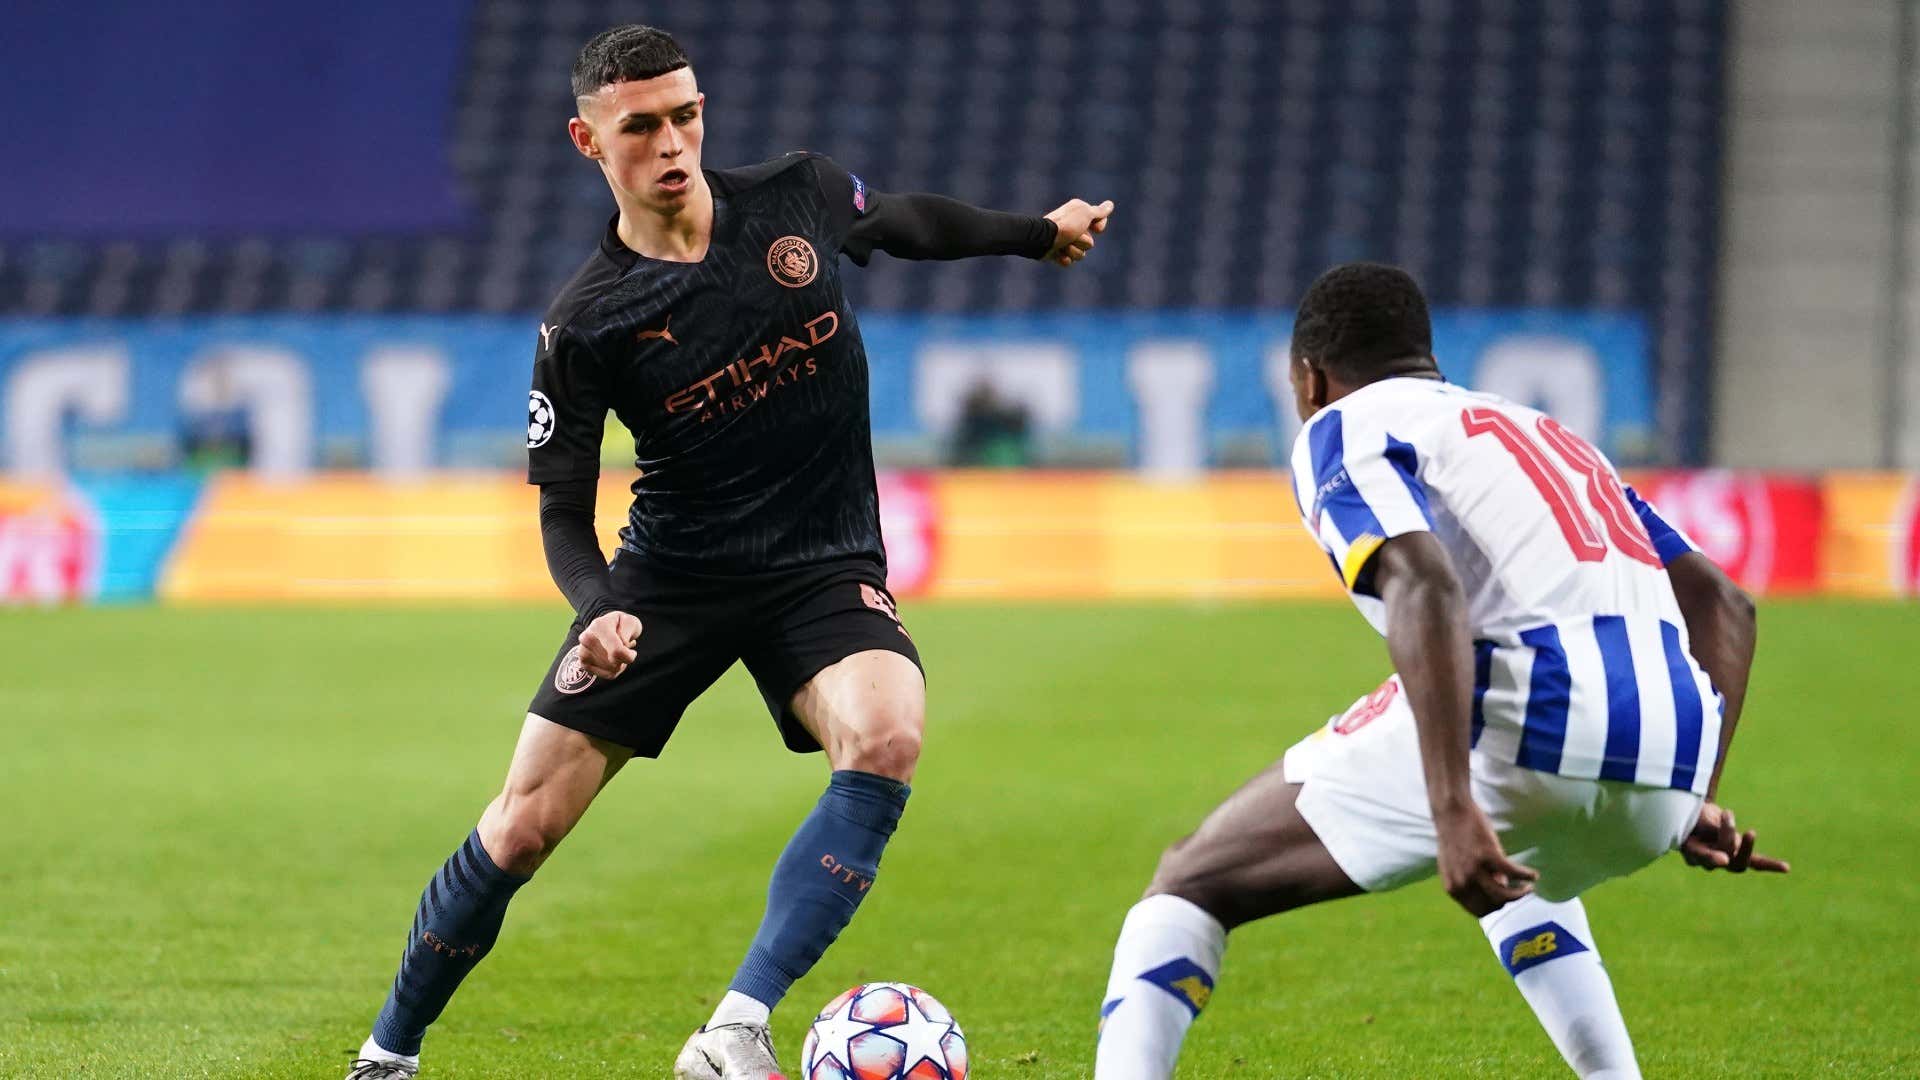 PhilFoden - cropped